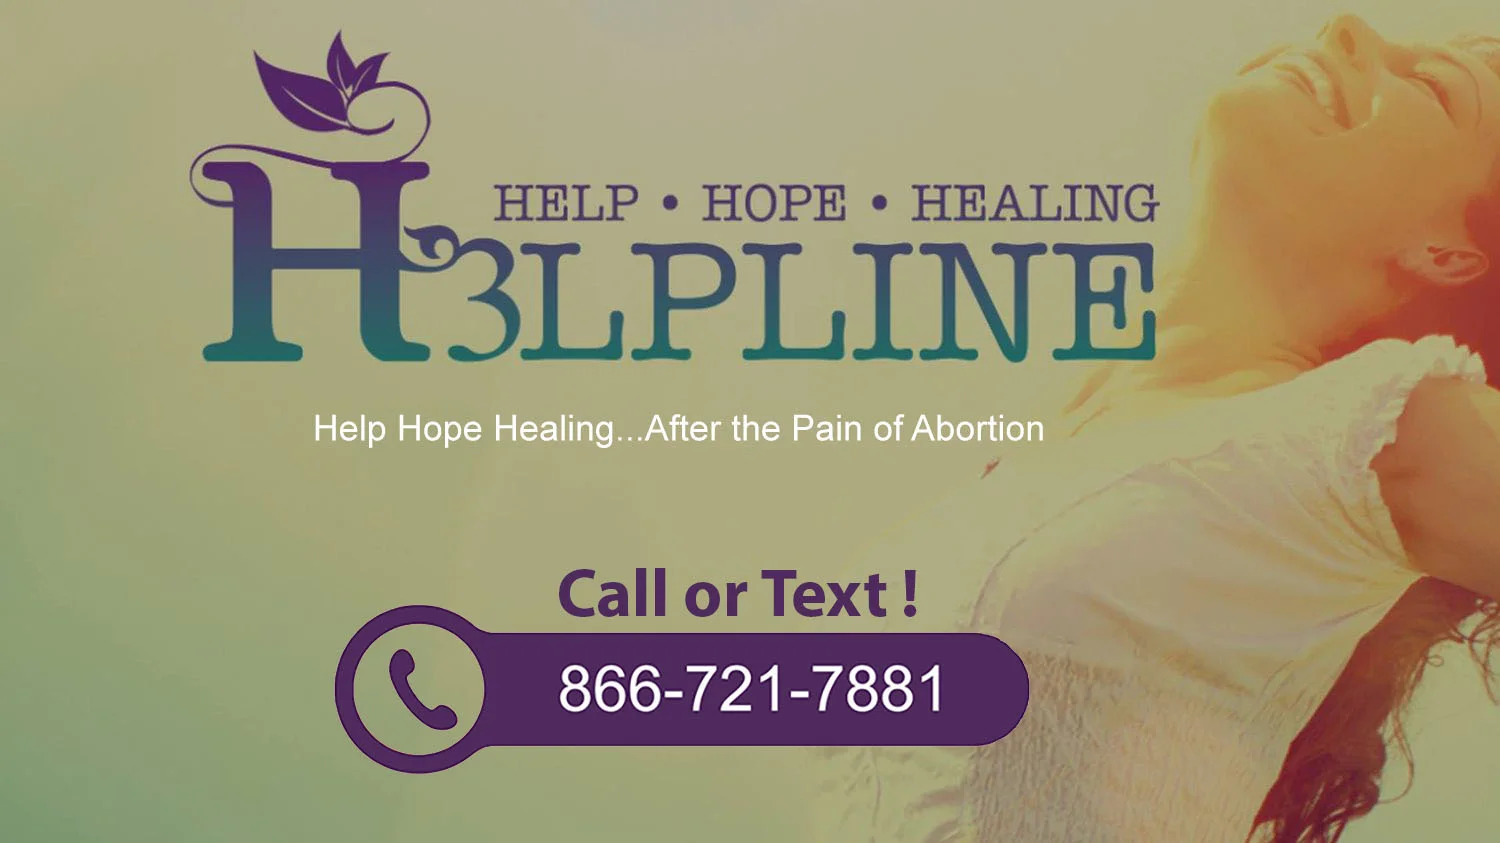 h3helpline logo and phone call contact button